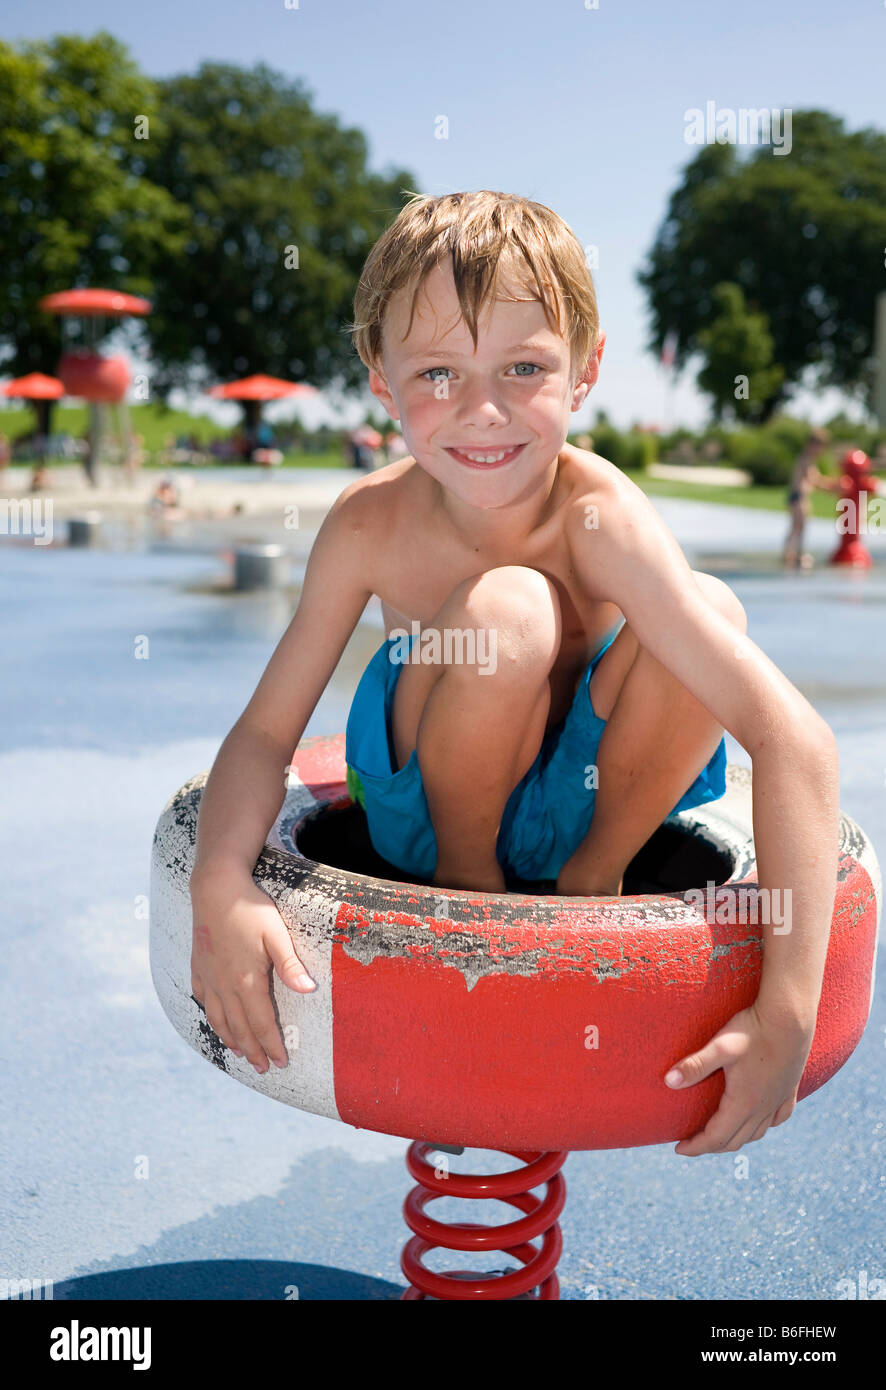 Boy, 6 year-old, sitting on a piece of playground equipment in a water park Stock Photo